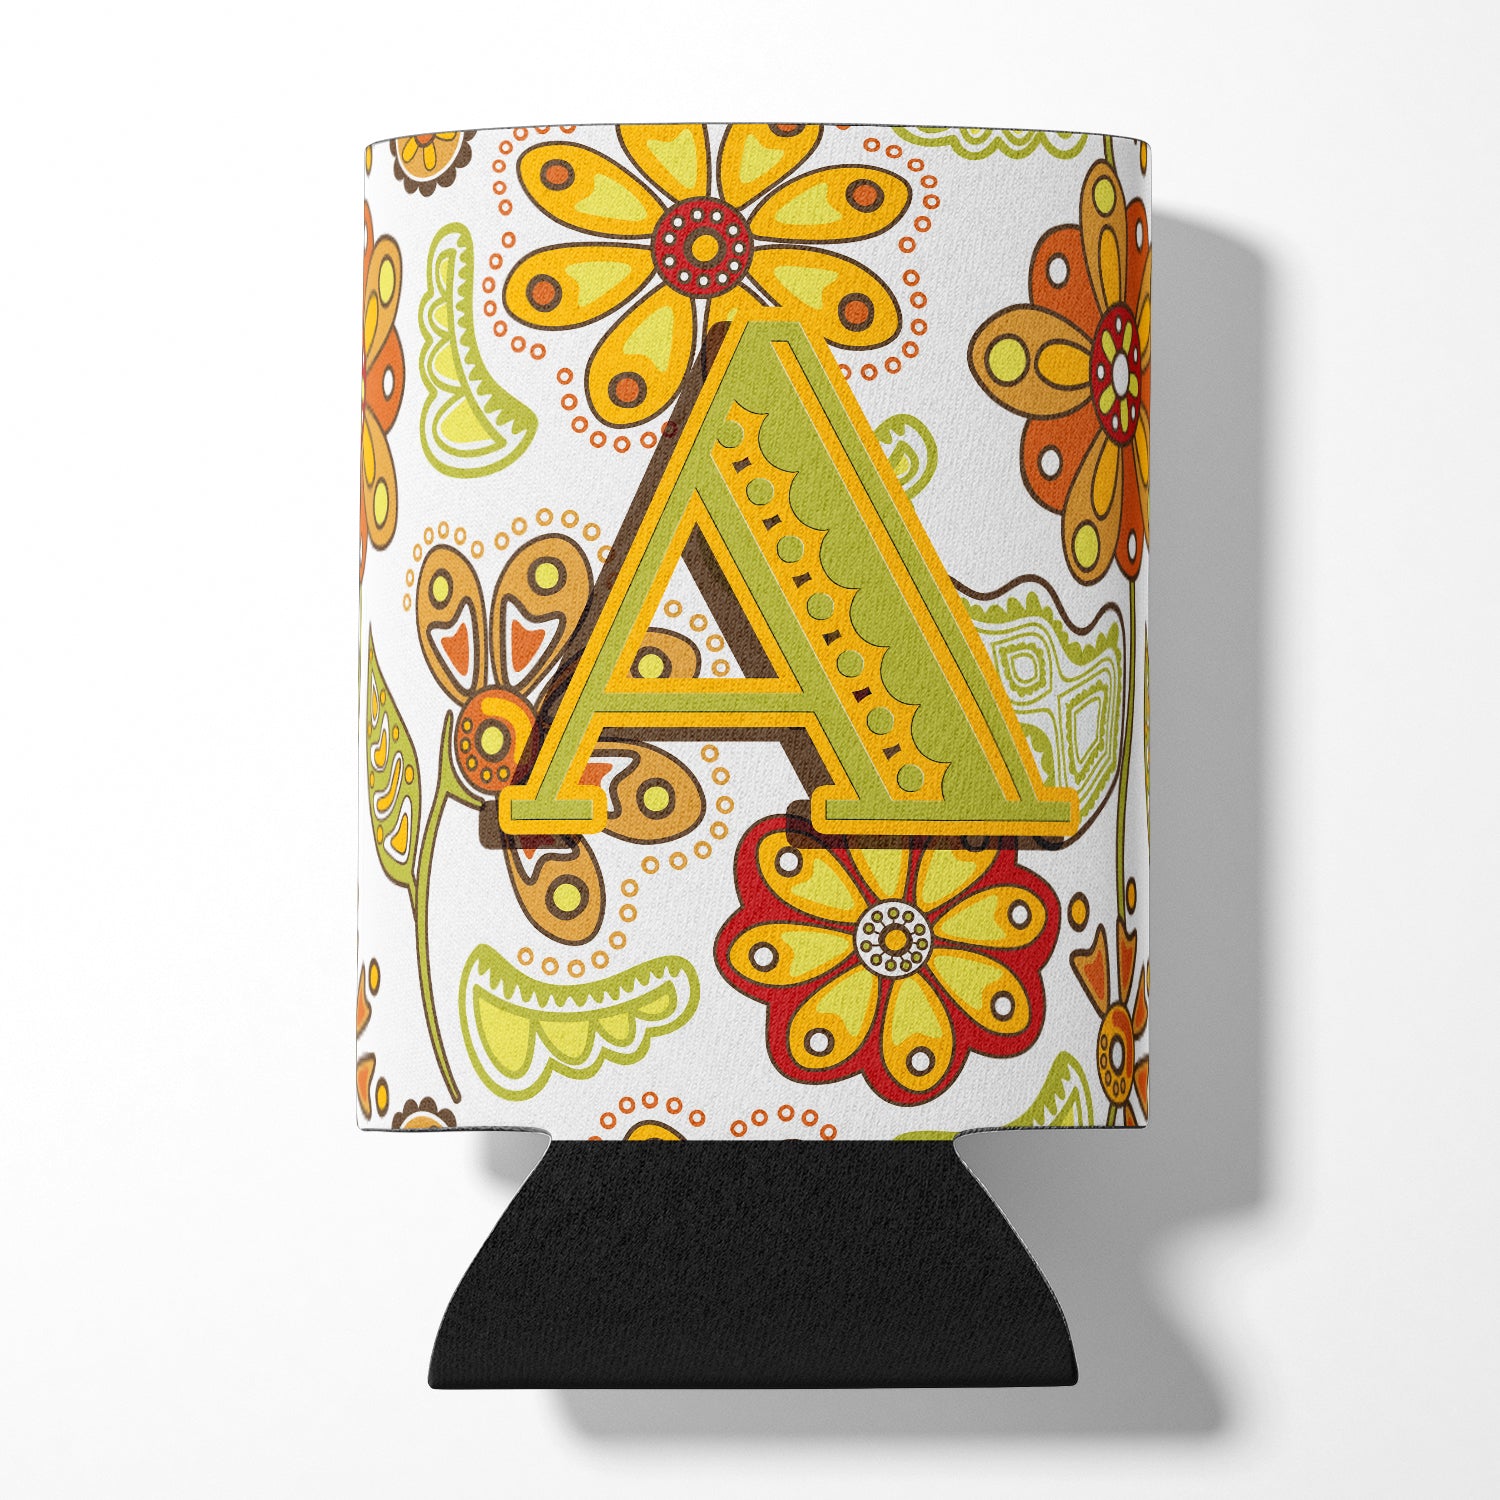 Letter A Floral Mustard and Green Can or Bottle Hugger CJ2003-ACC.